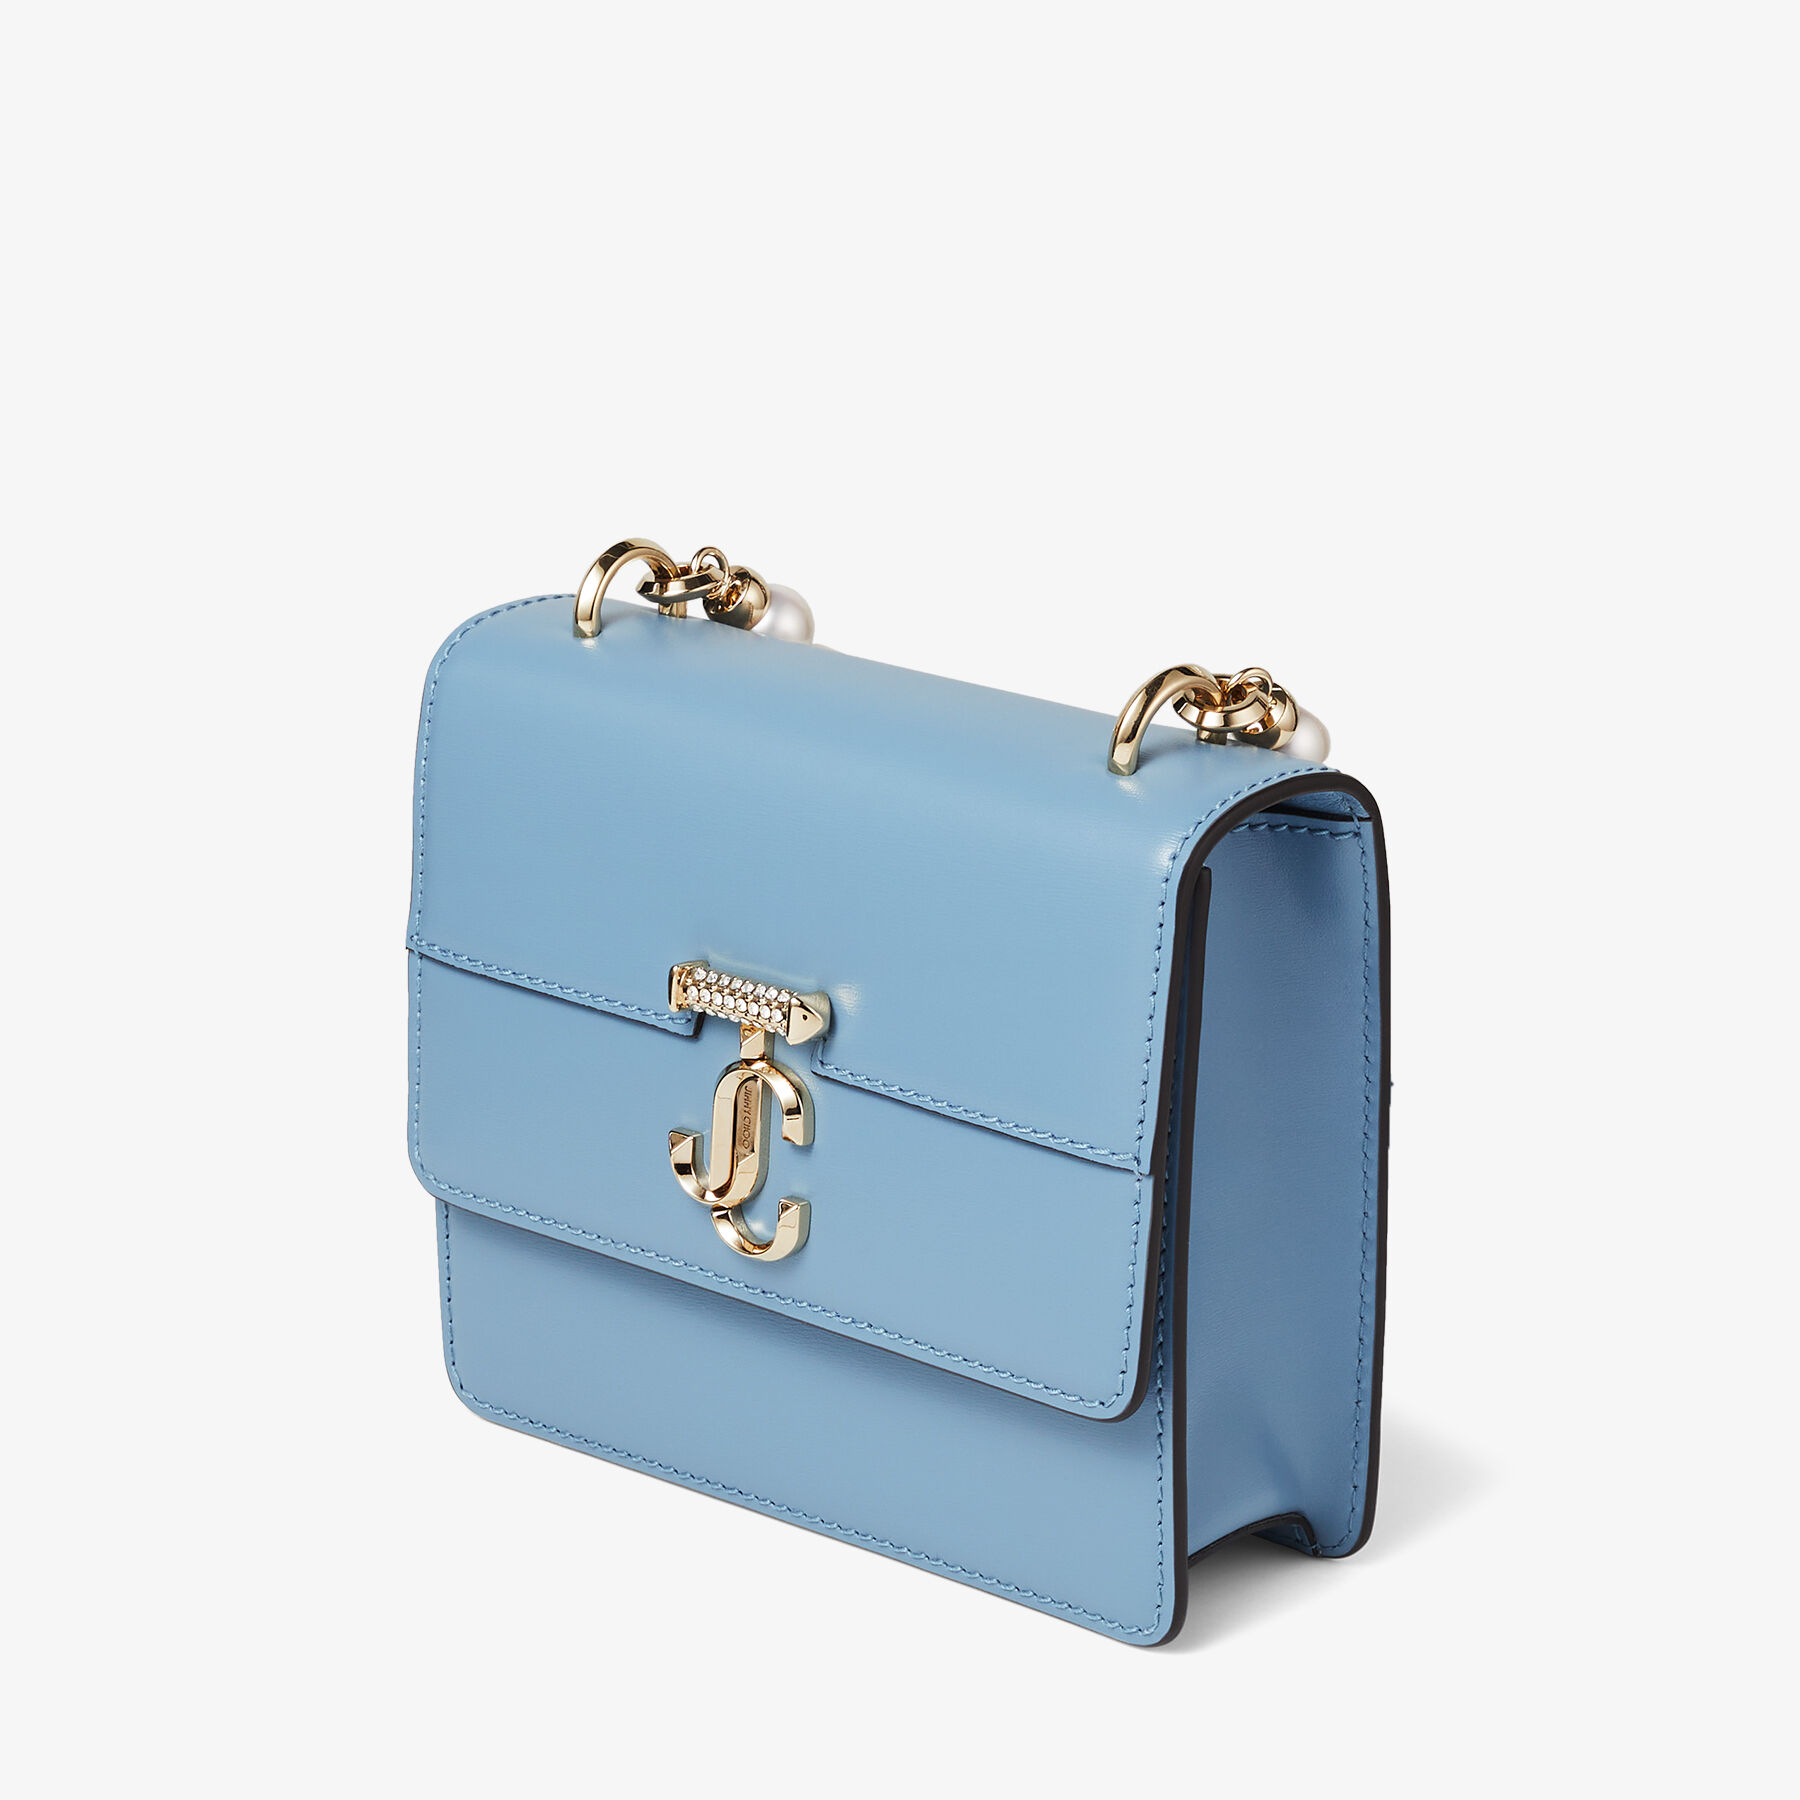 AVENUE QUAD XS | Smoky Blue Box Leather Shoulder Bag with Pearl 